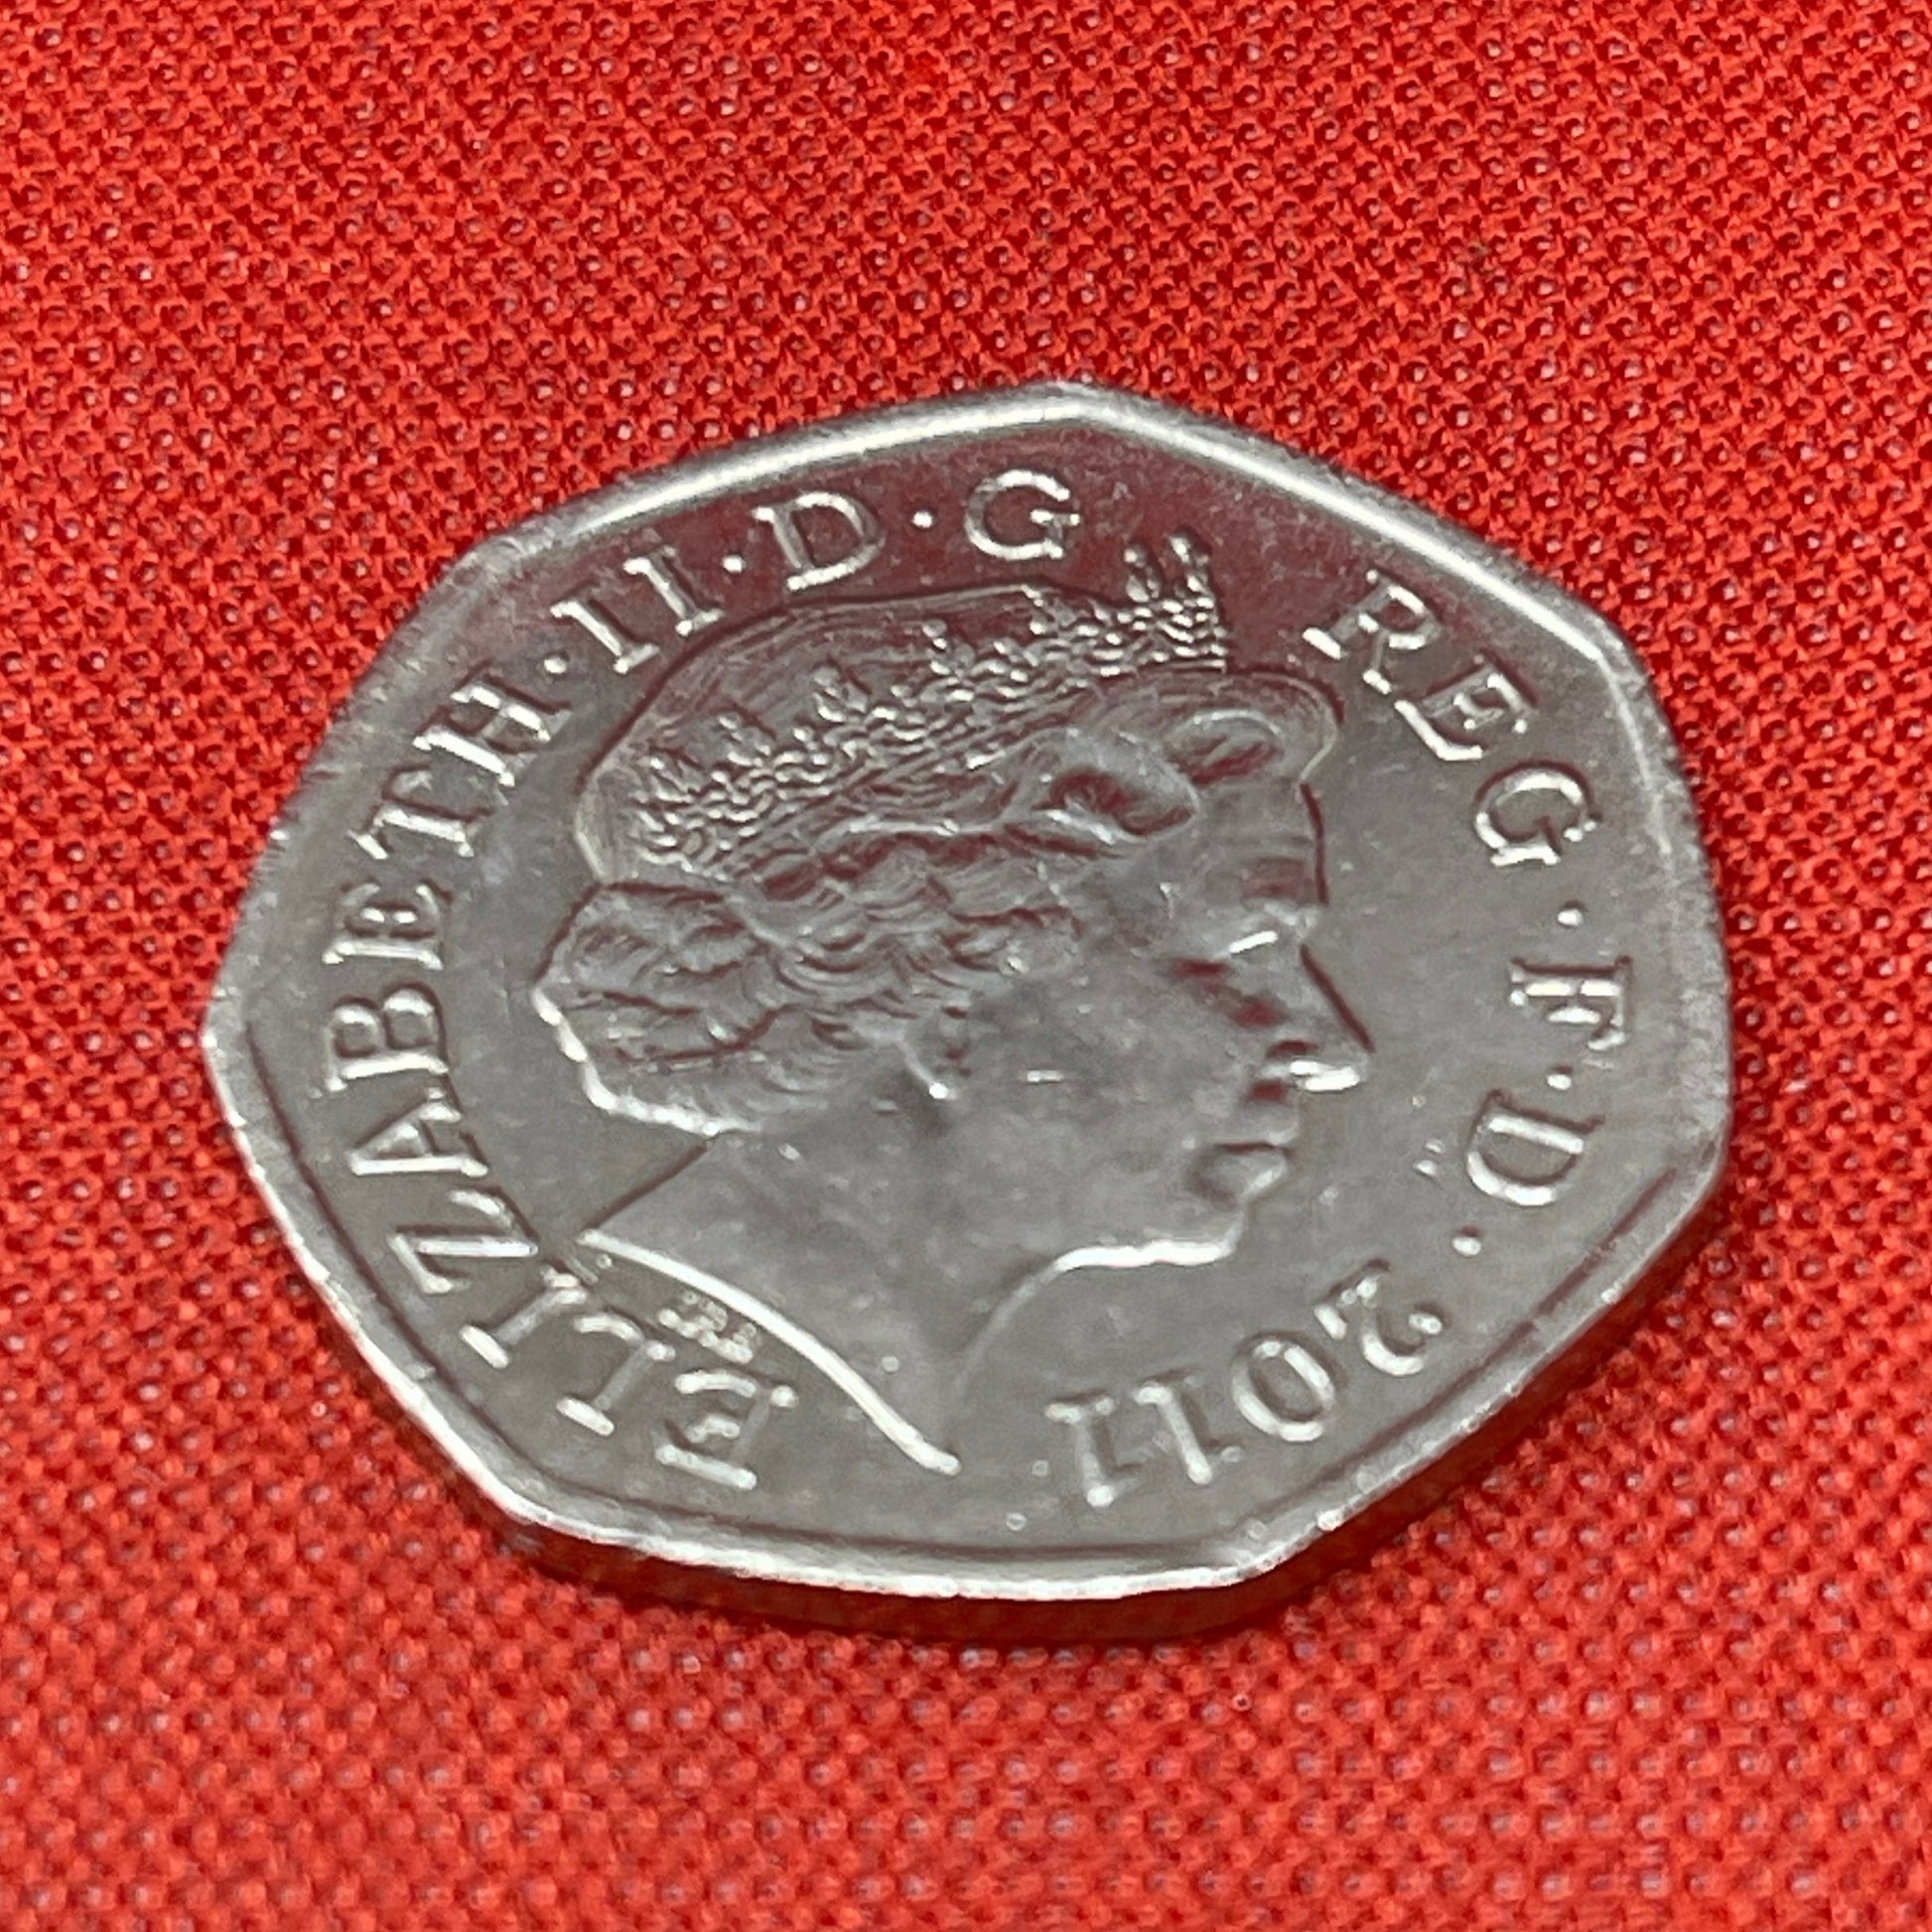 2011 London Olympic Canoeing 50p Coin